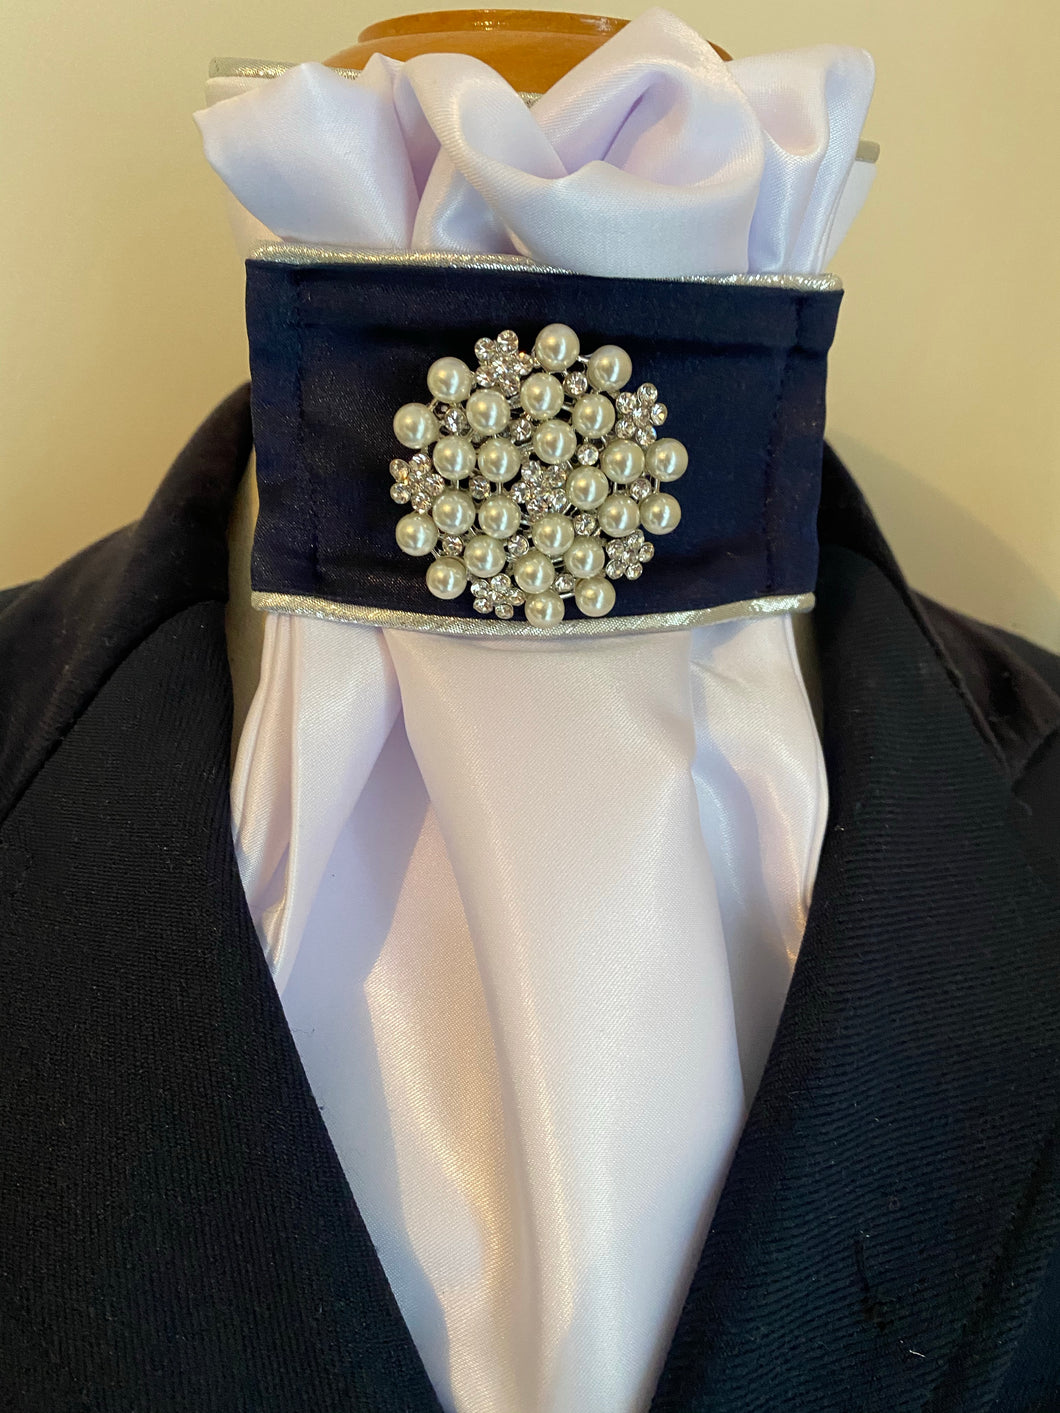 HHD White Satin ’Dianna’ Pre Tied Dressage Euro Stock Tie in Navy Silver & Pearls